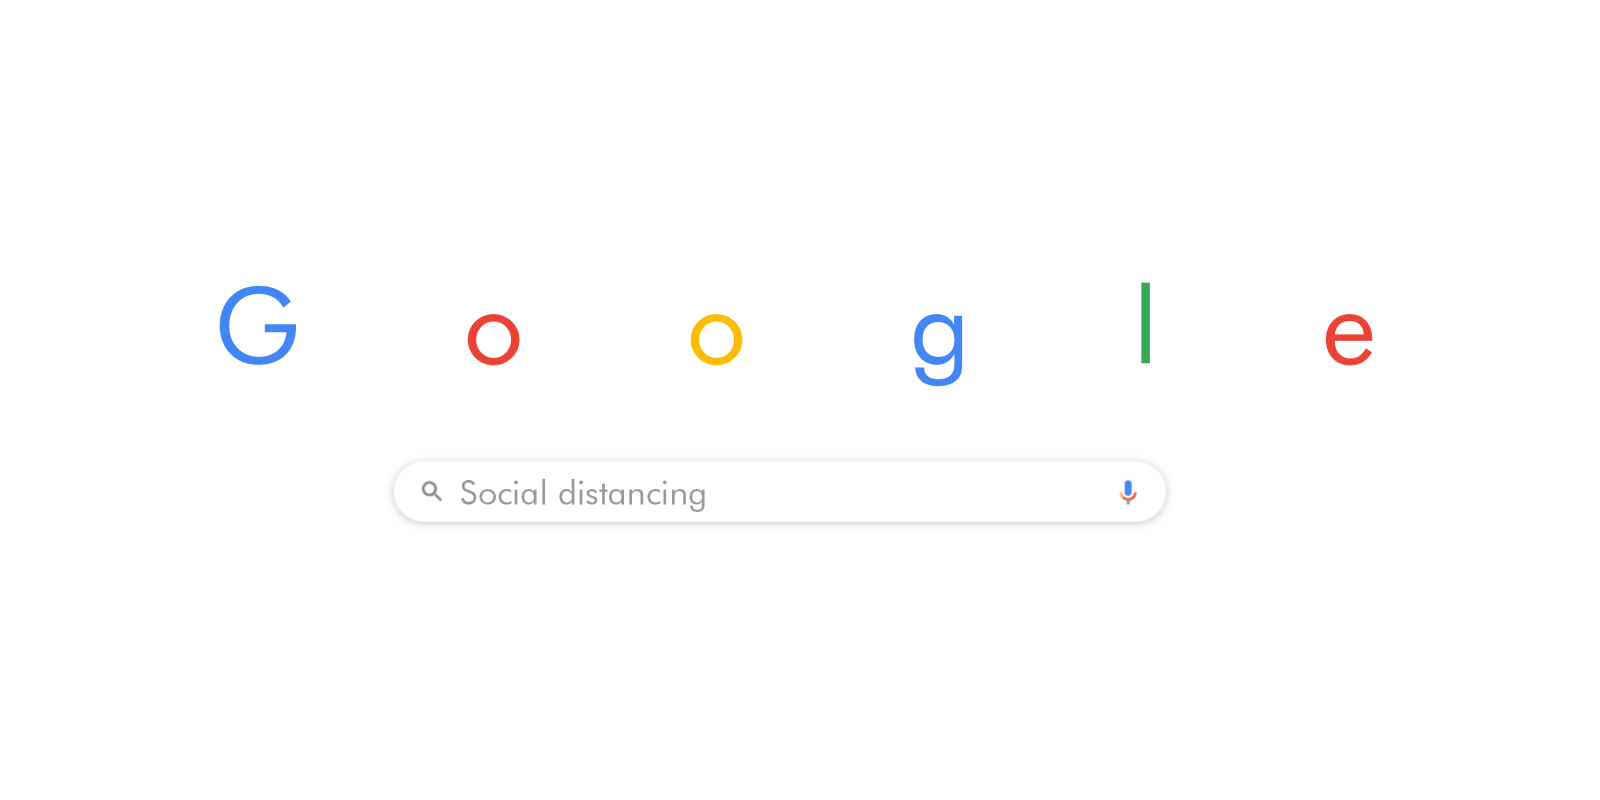 Google Doodles - Google's Search Logo Changes for Every Occasion